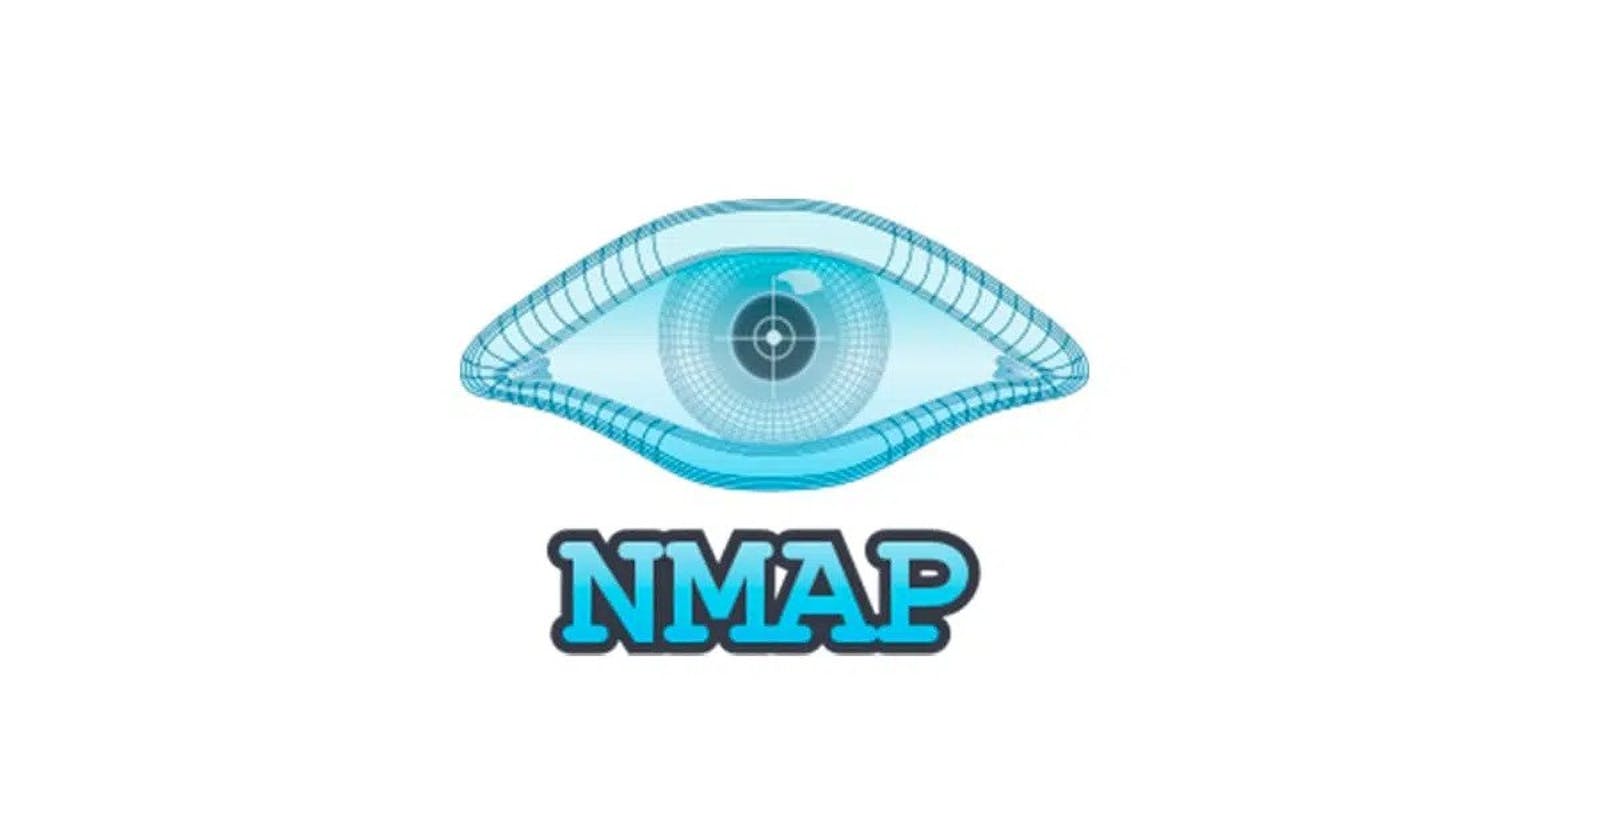 How to scan networks with NMAP